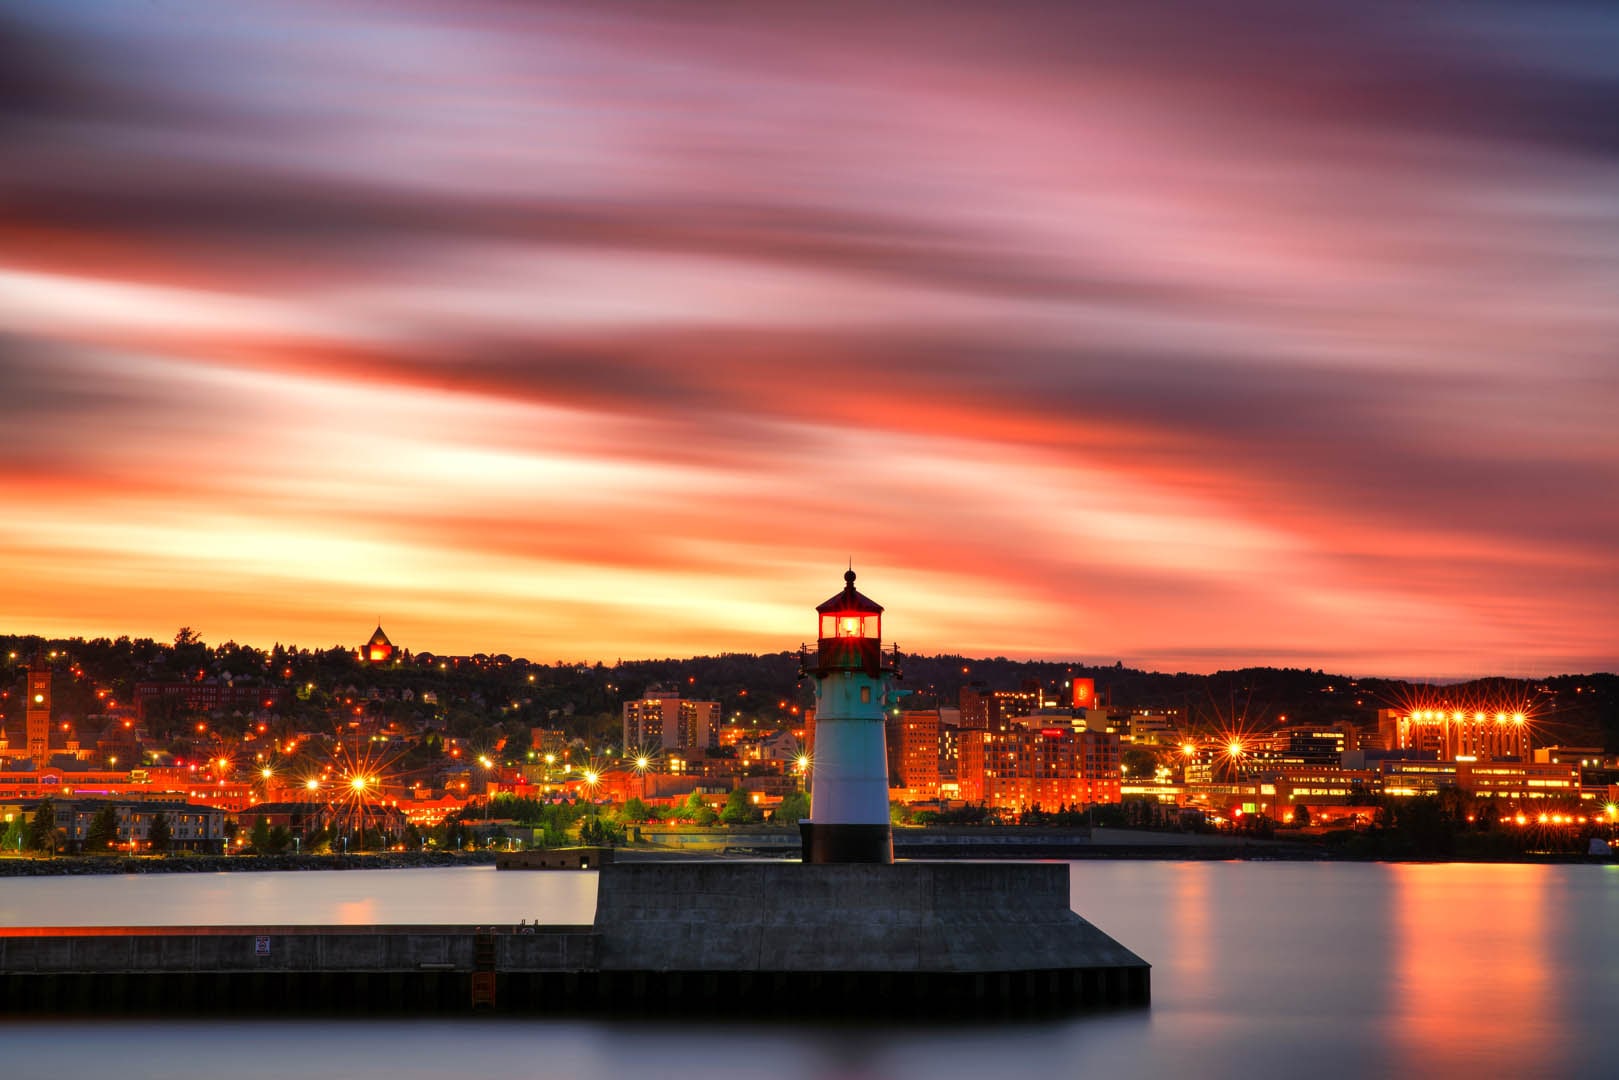 Orange sunset with lighthouse in the foreground and city lights in the distance.